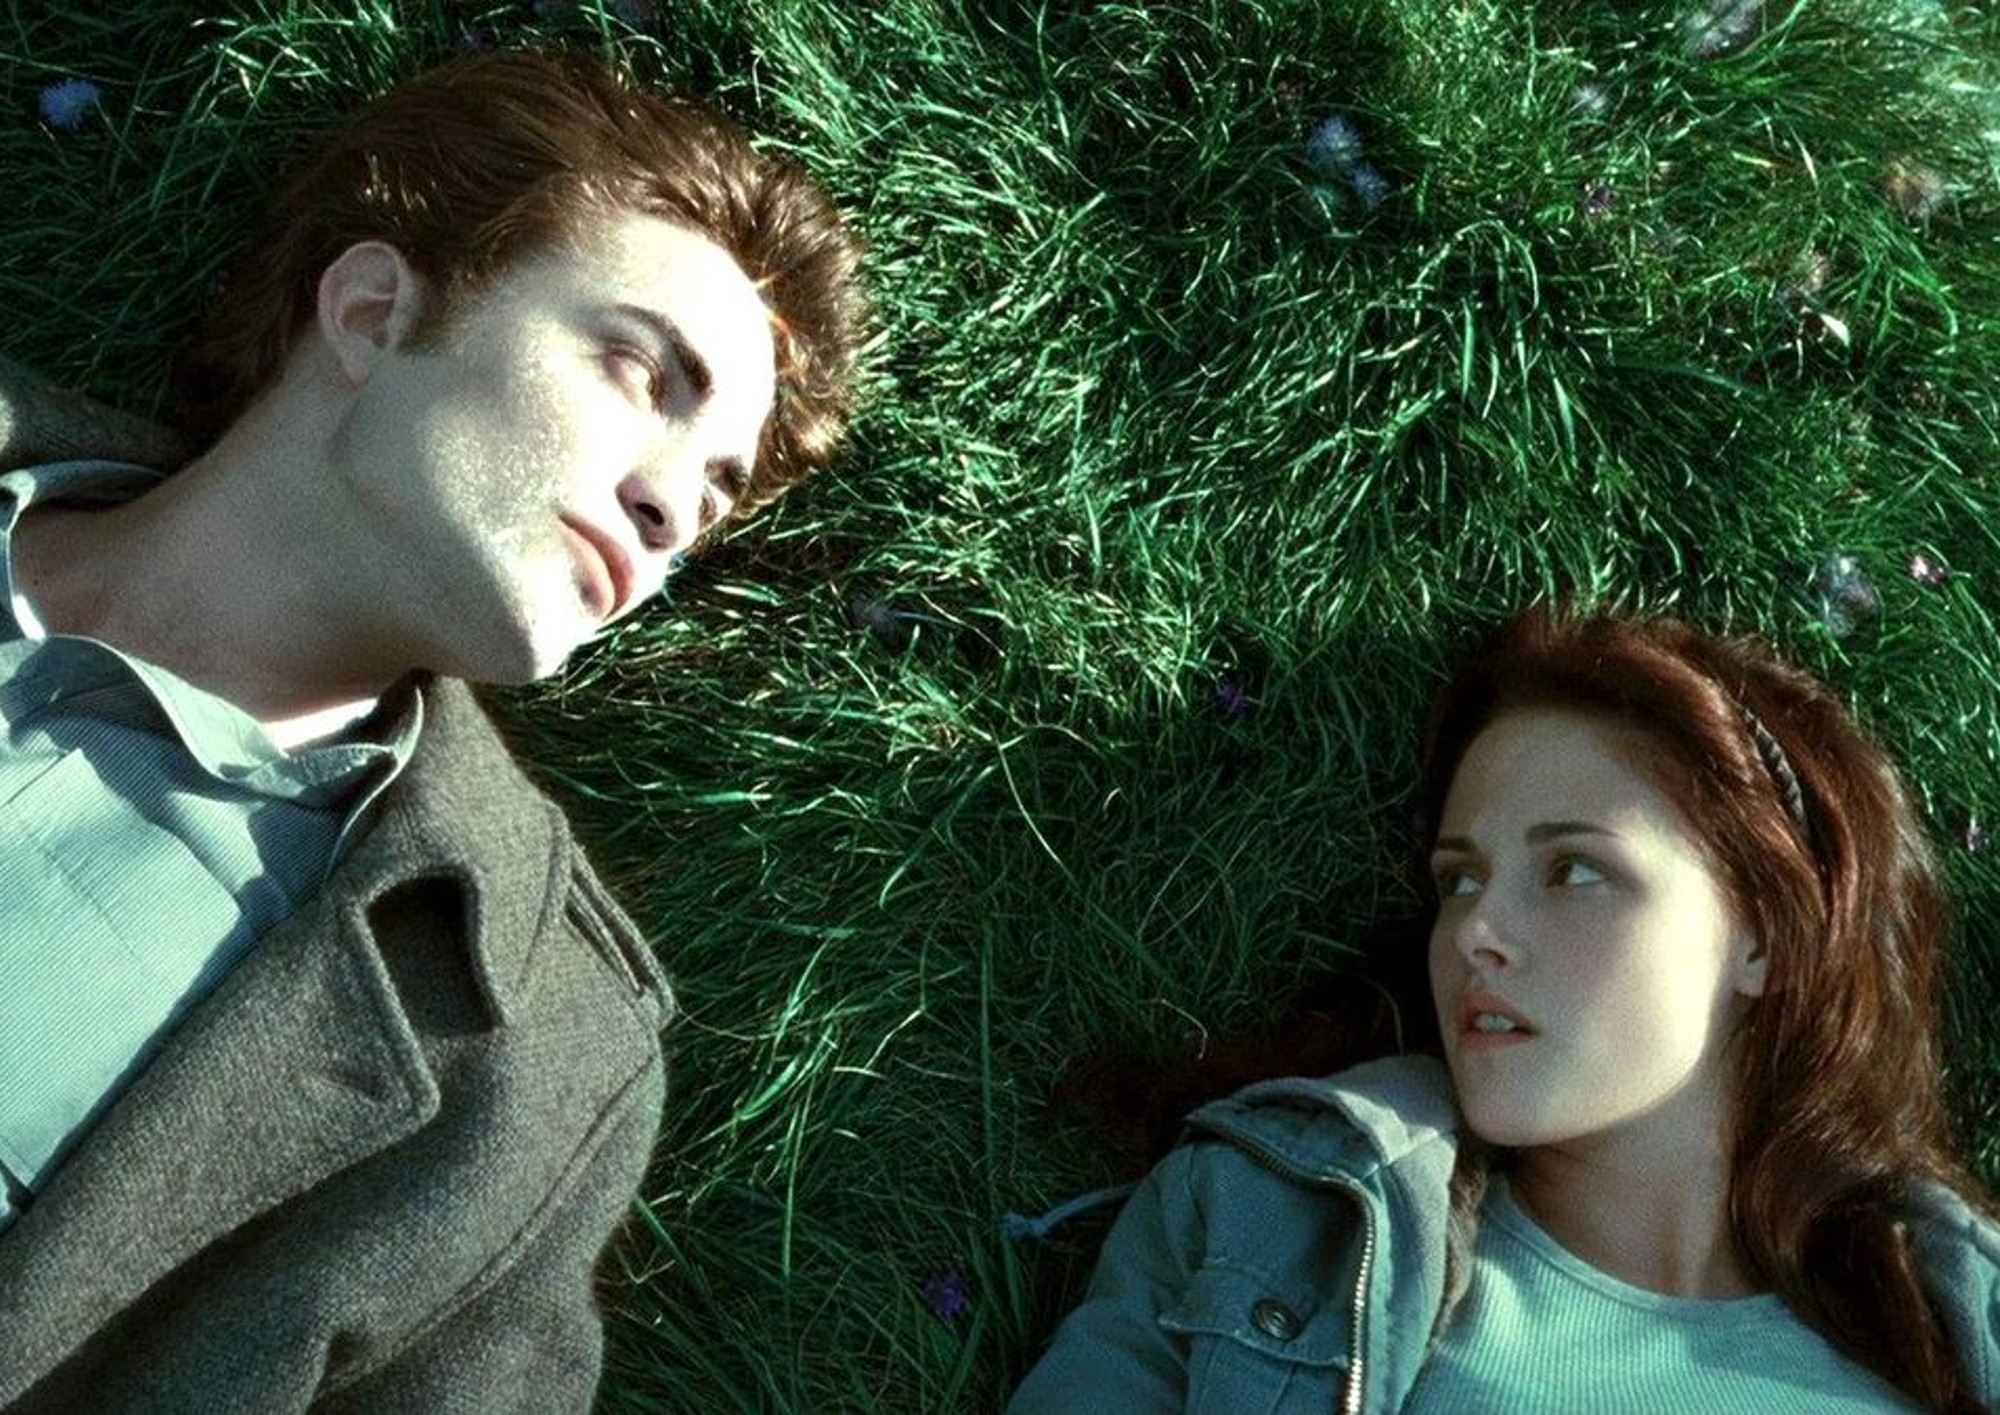 Image from the motion picture Twilight